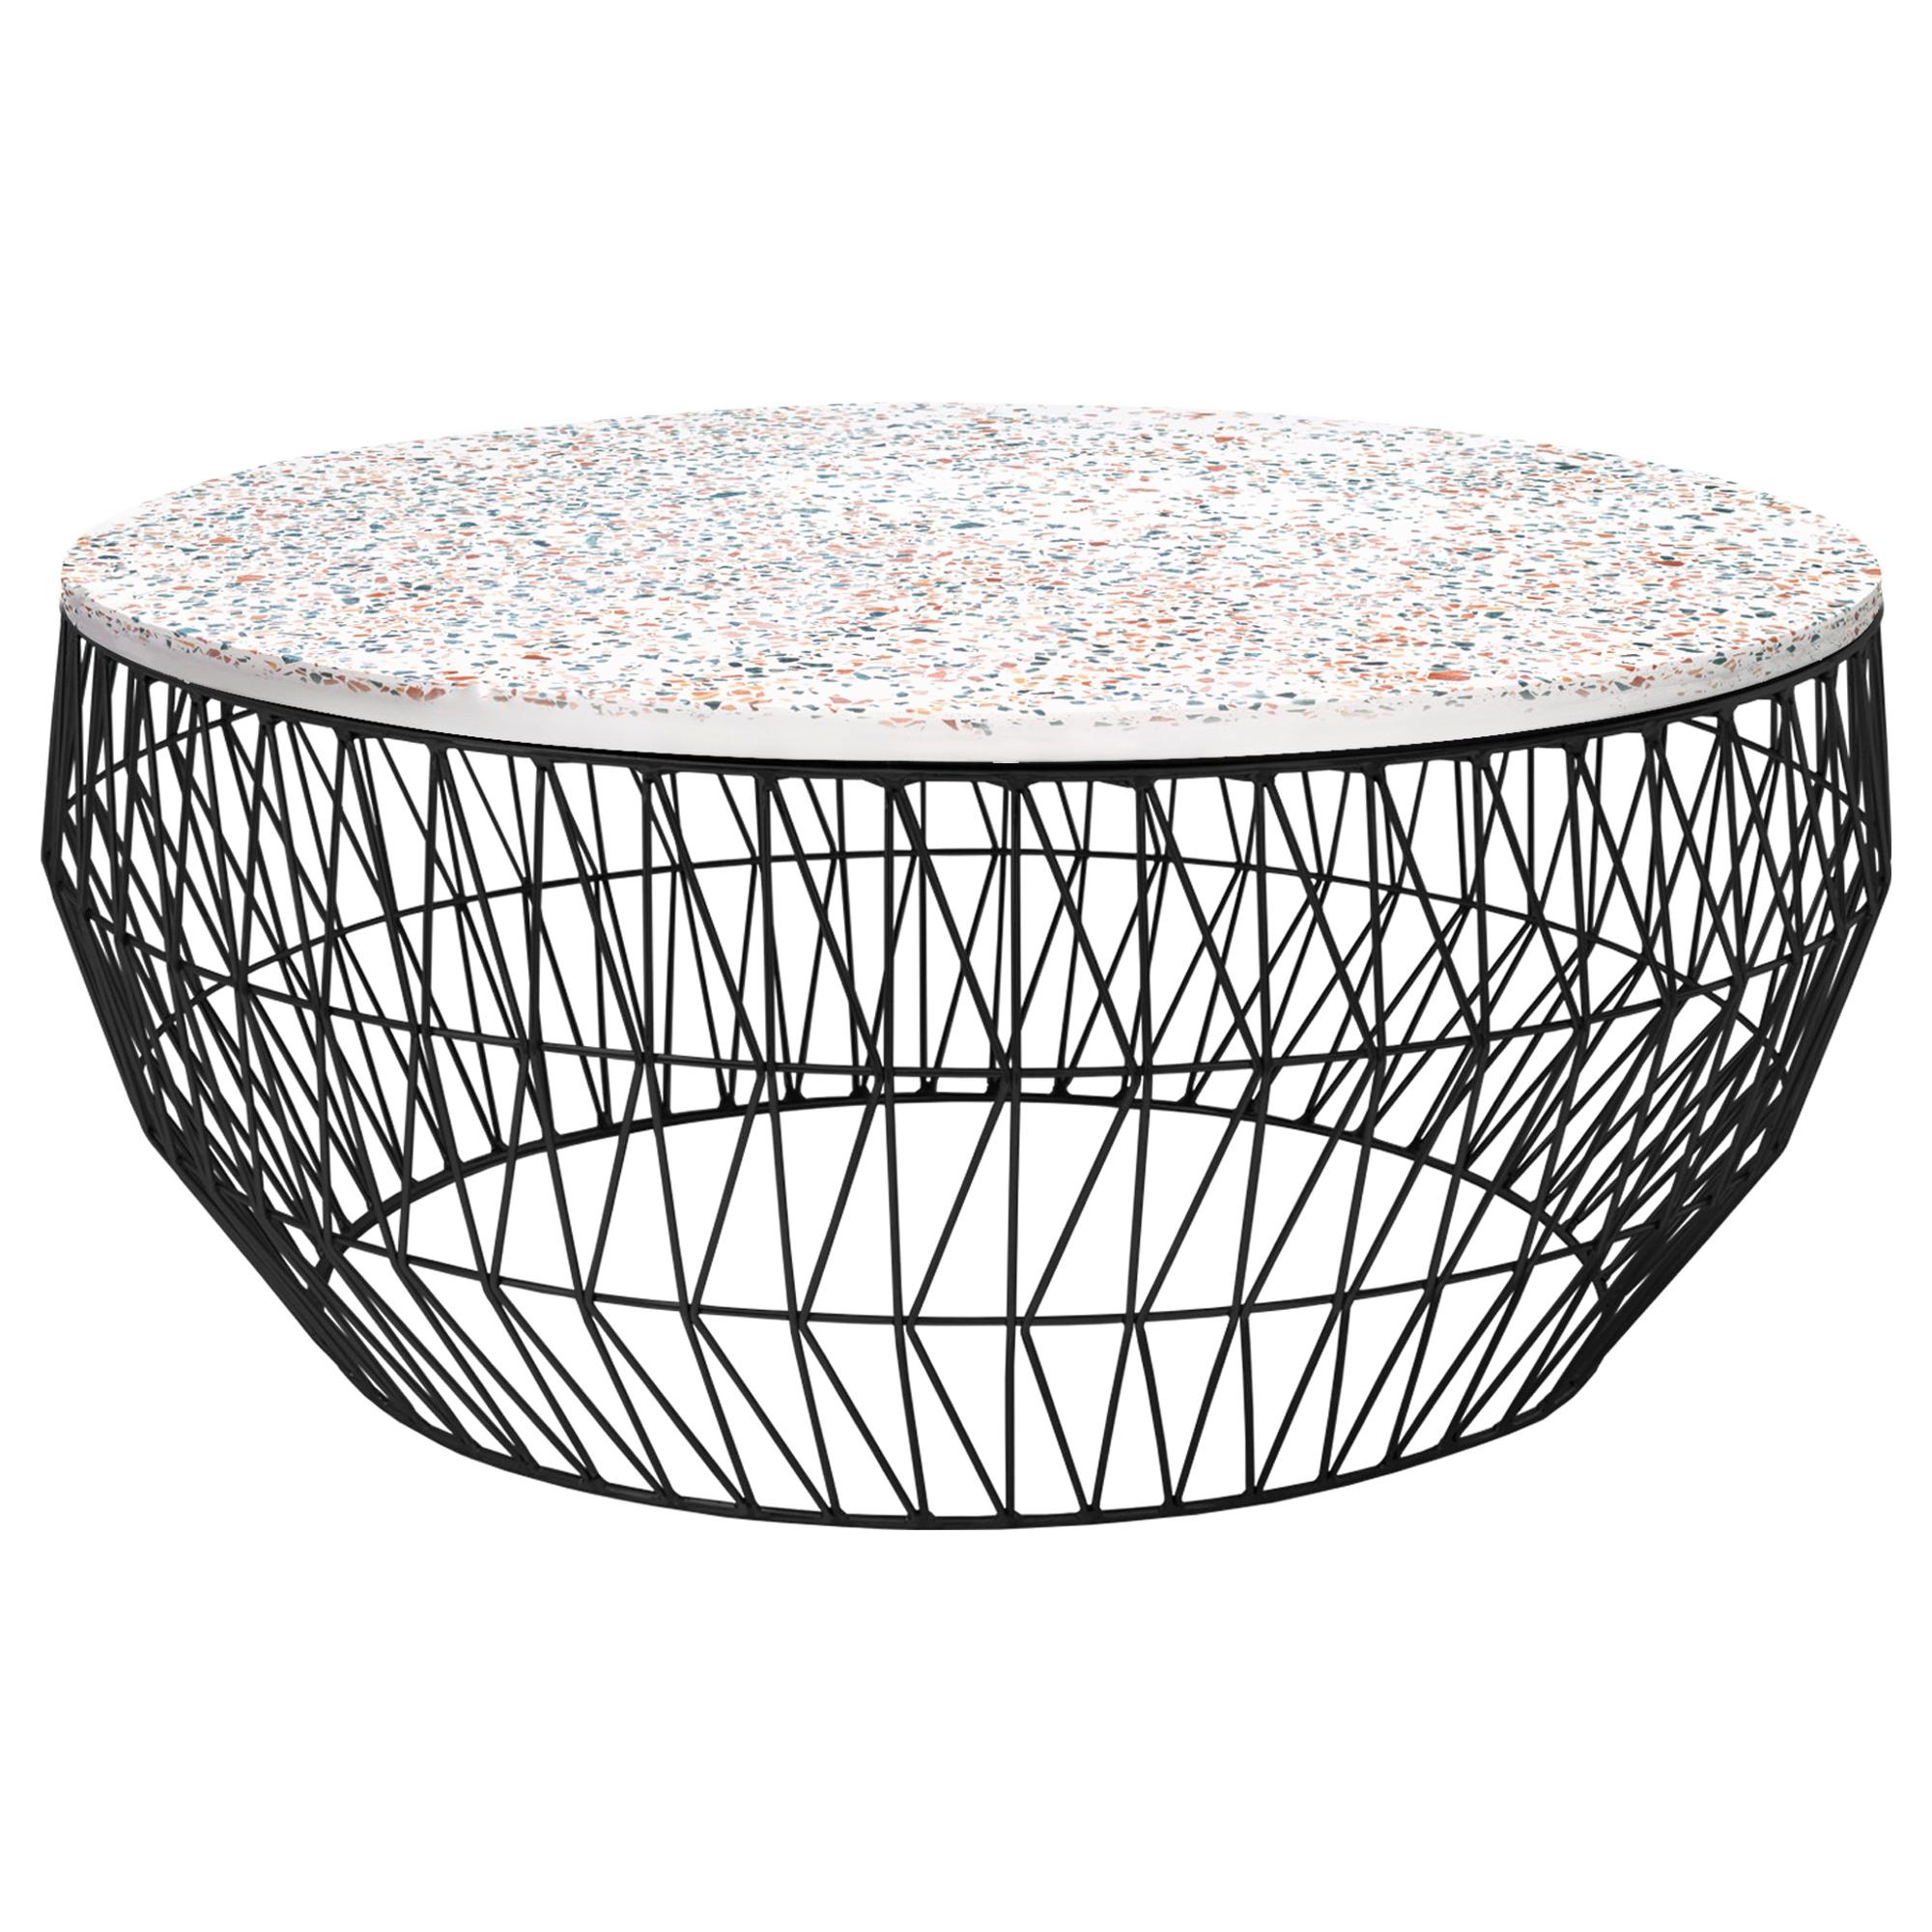 Minimalist Coffee Table, Wire Center Table in Black with Terrazzo